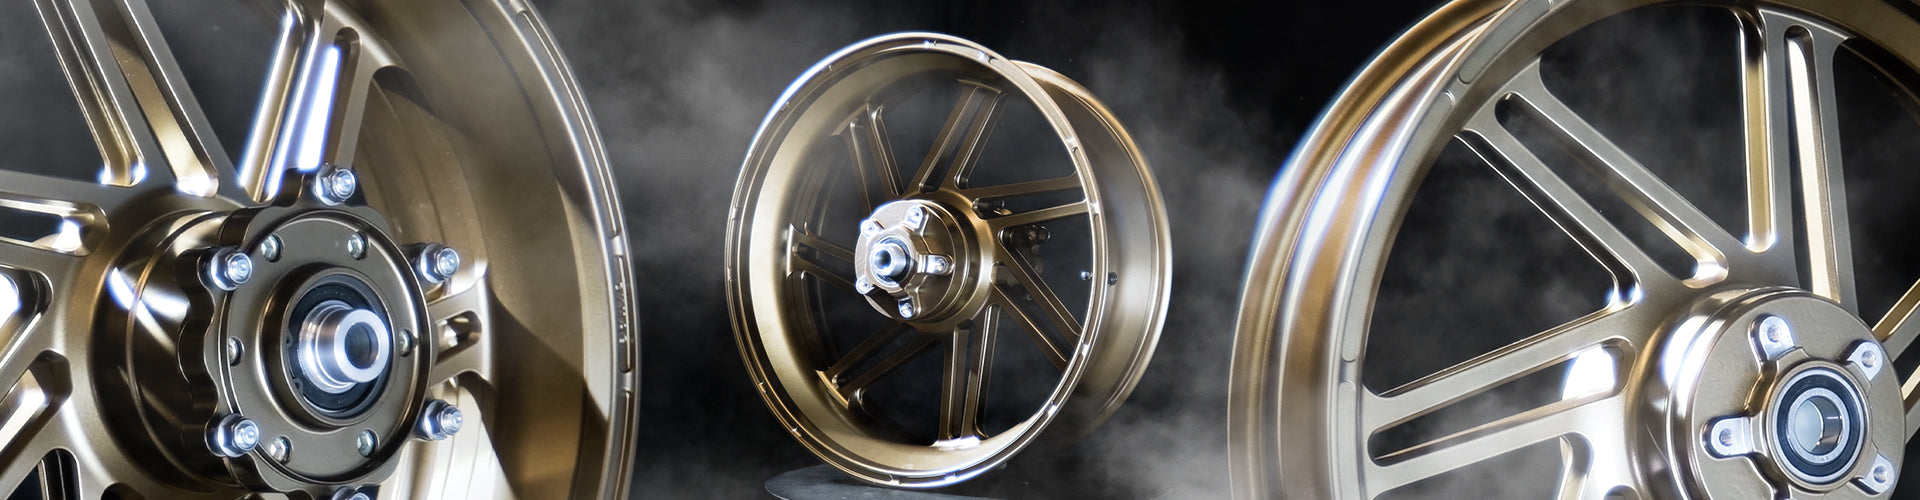 A detailed view of three golden Dymag racing wheels arranged sequentially against a smoky background. The focus gradually shifts from a close-up of the wheel hub in the foreground to a full view of the wheel in the background, highlighting the sleek design and metallic finish of the wheels.